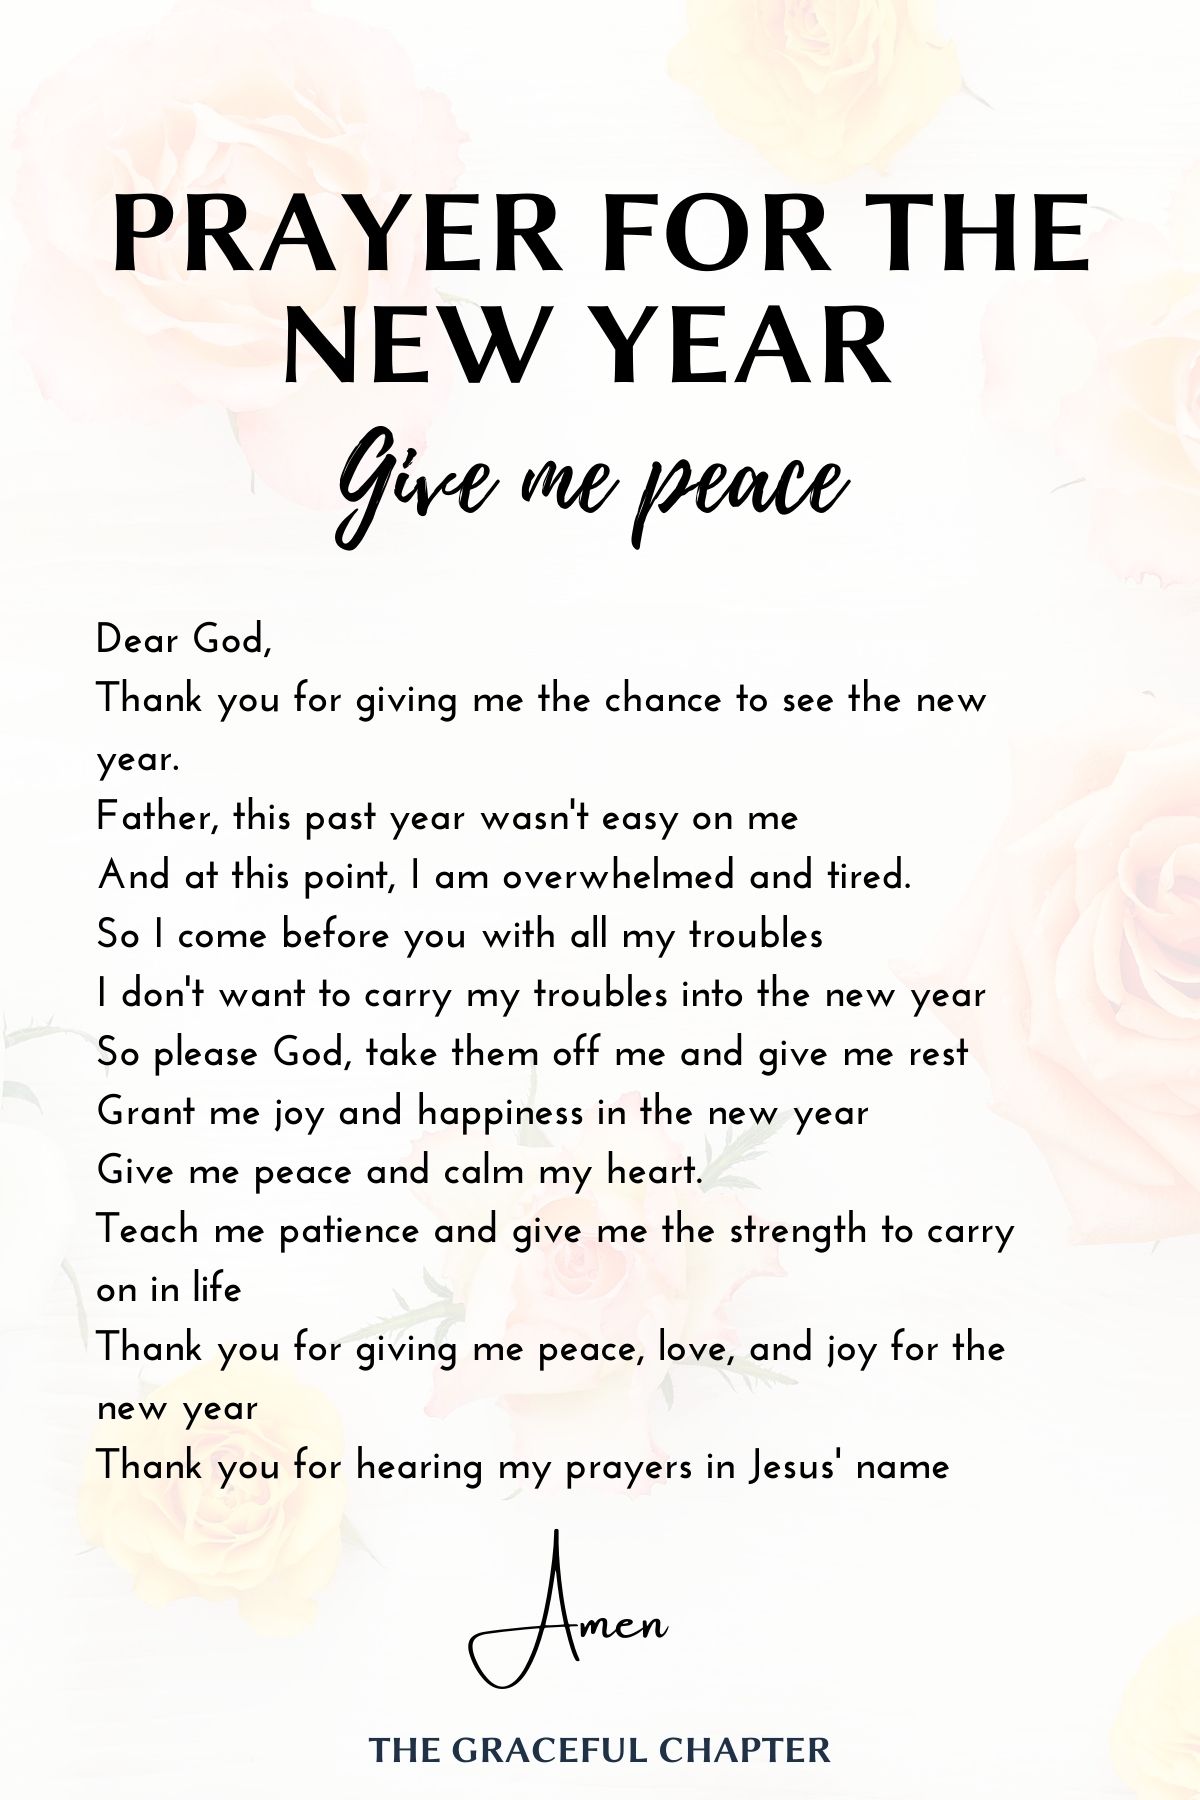 Prayers for the new year - Give me peace